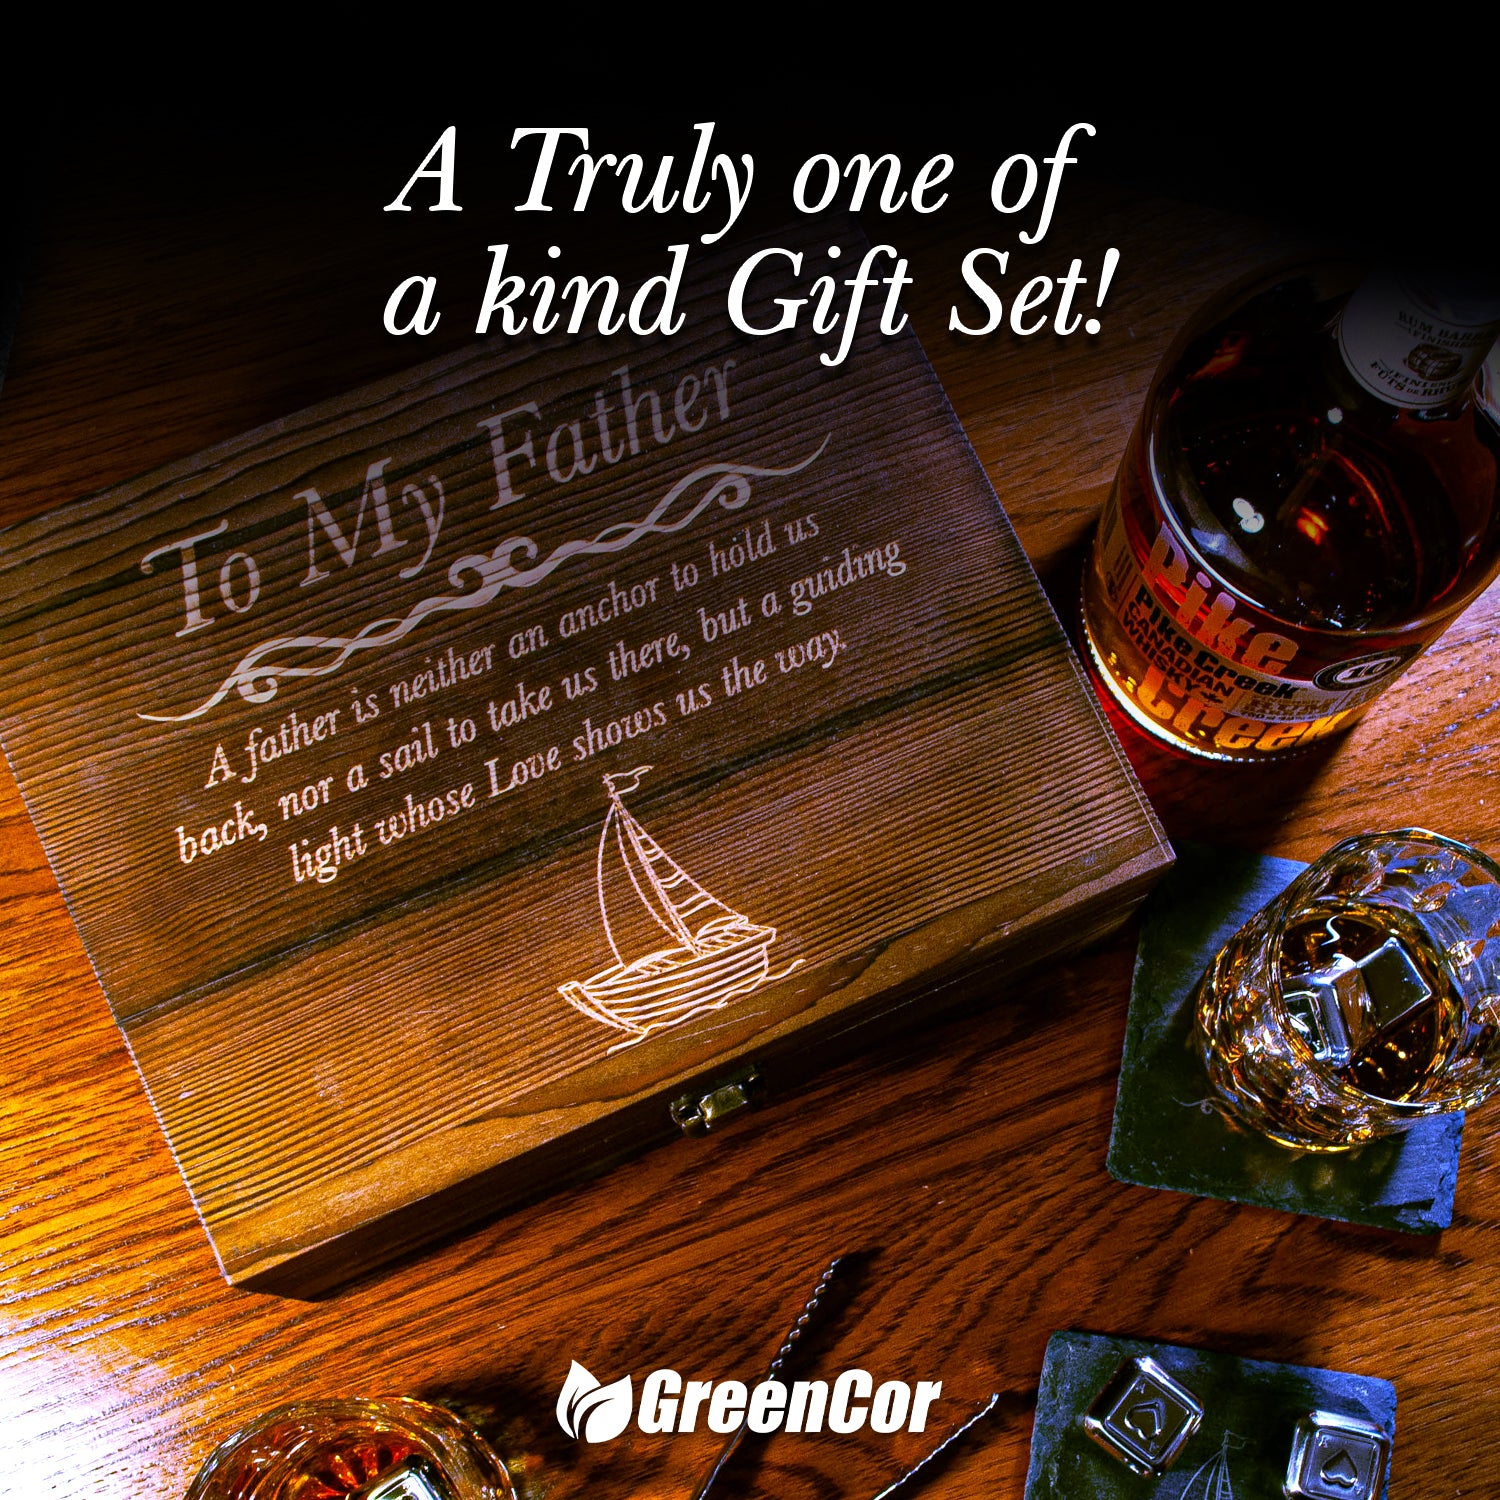 The Perfect Gift For Your Father- "To My Father" Whisky Glass Gift Set